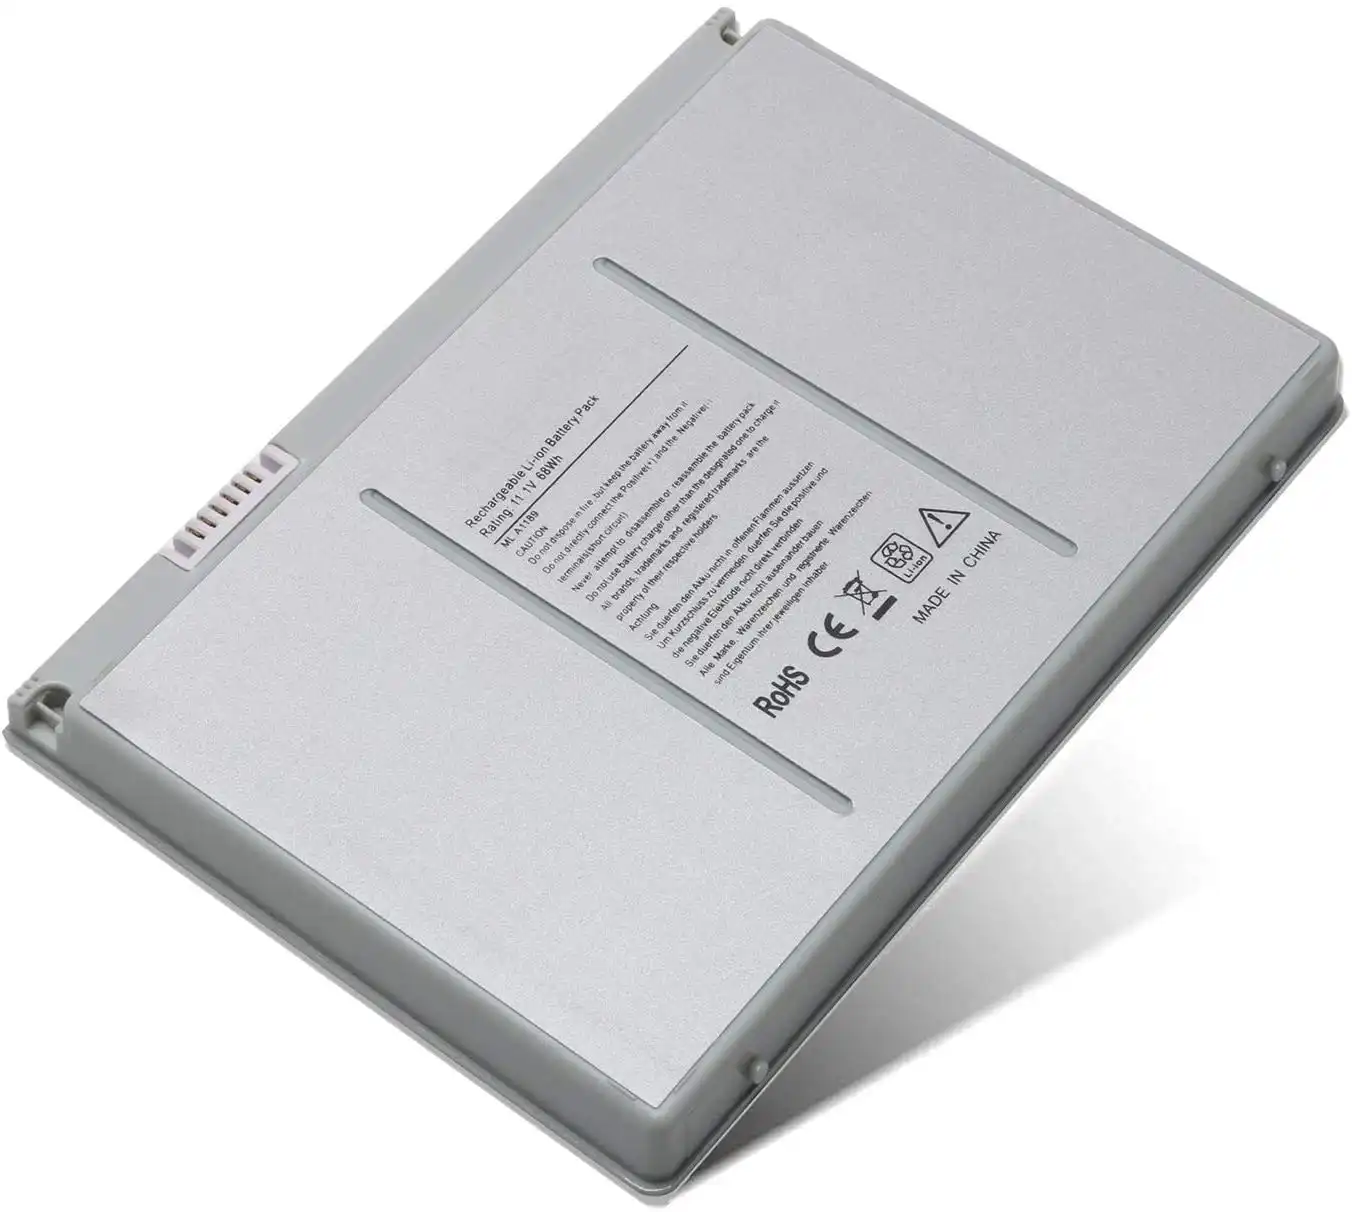 MacBook MacBook Pro 17-inch A1151 Replacement Battery